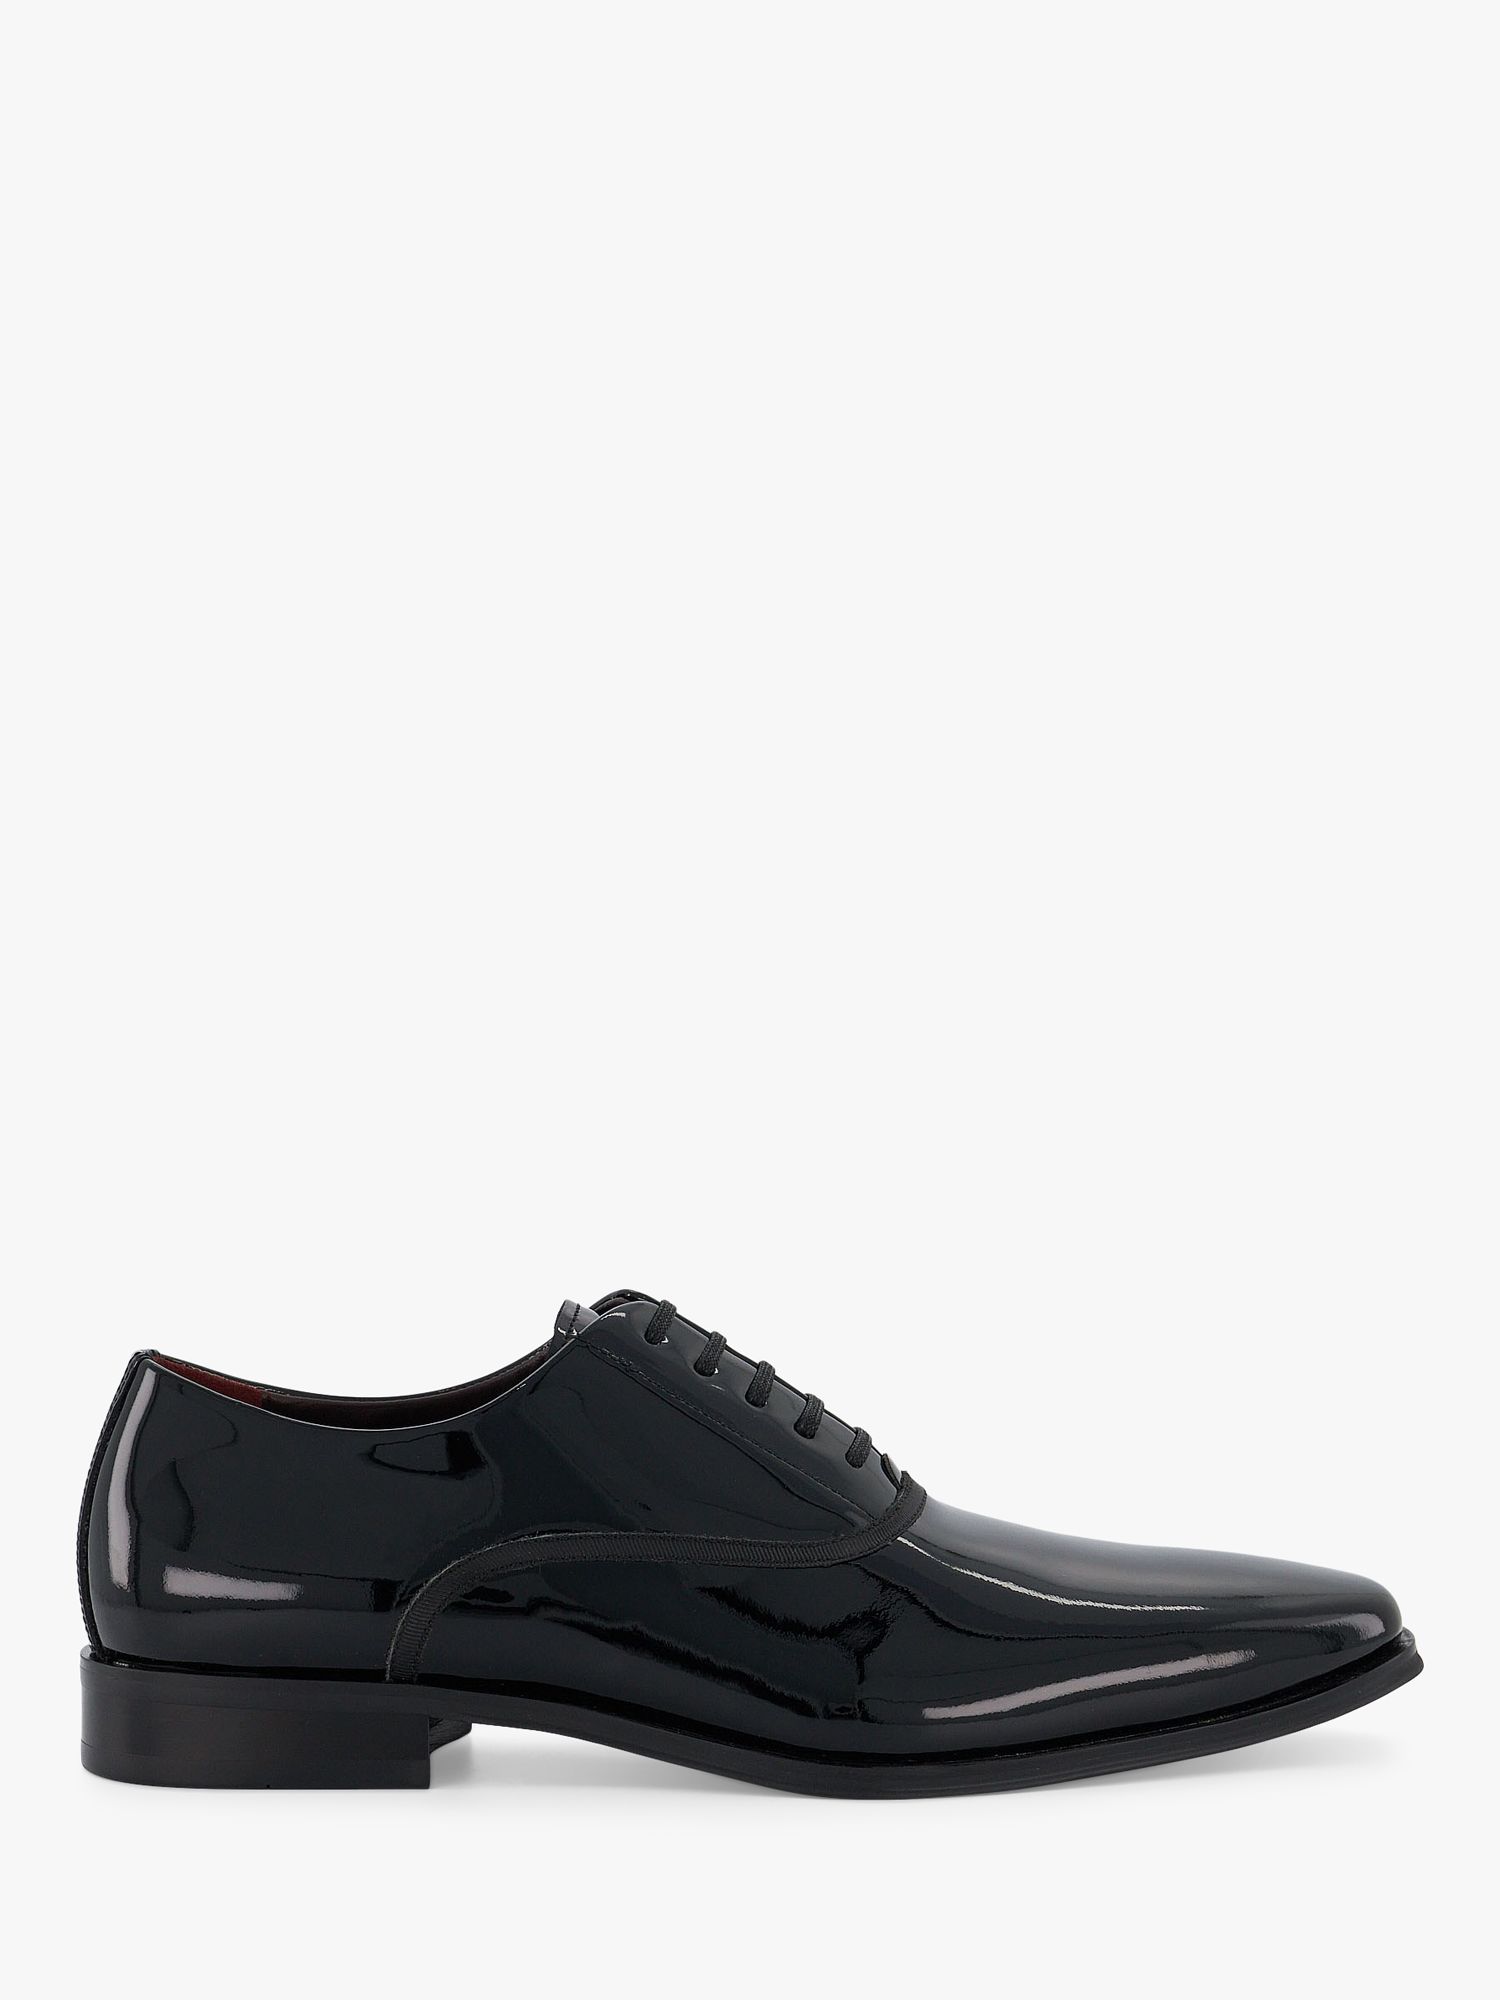 Buy Dune Swallow Wide Fit Patent Leather Oxford Shoes, Black Online at johnlewis.com